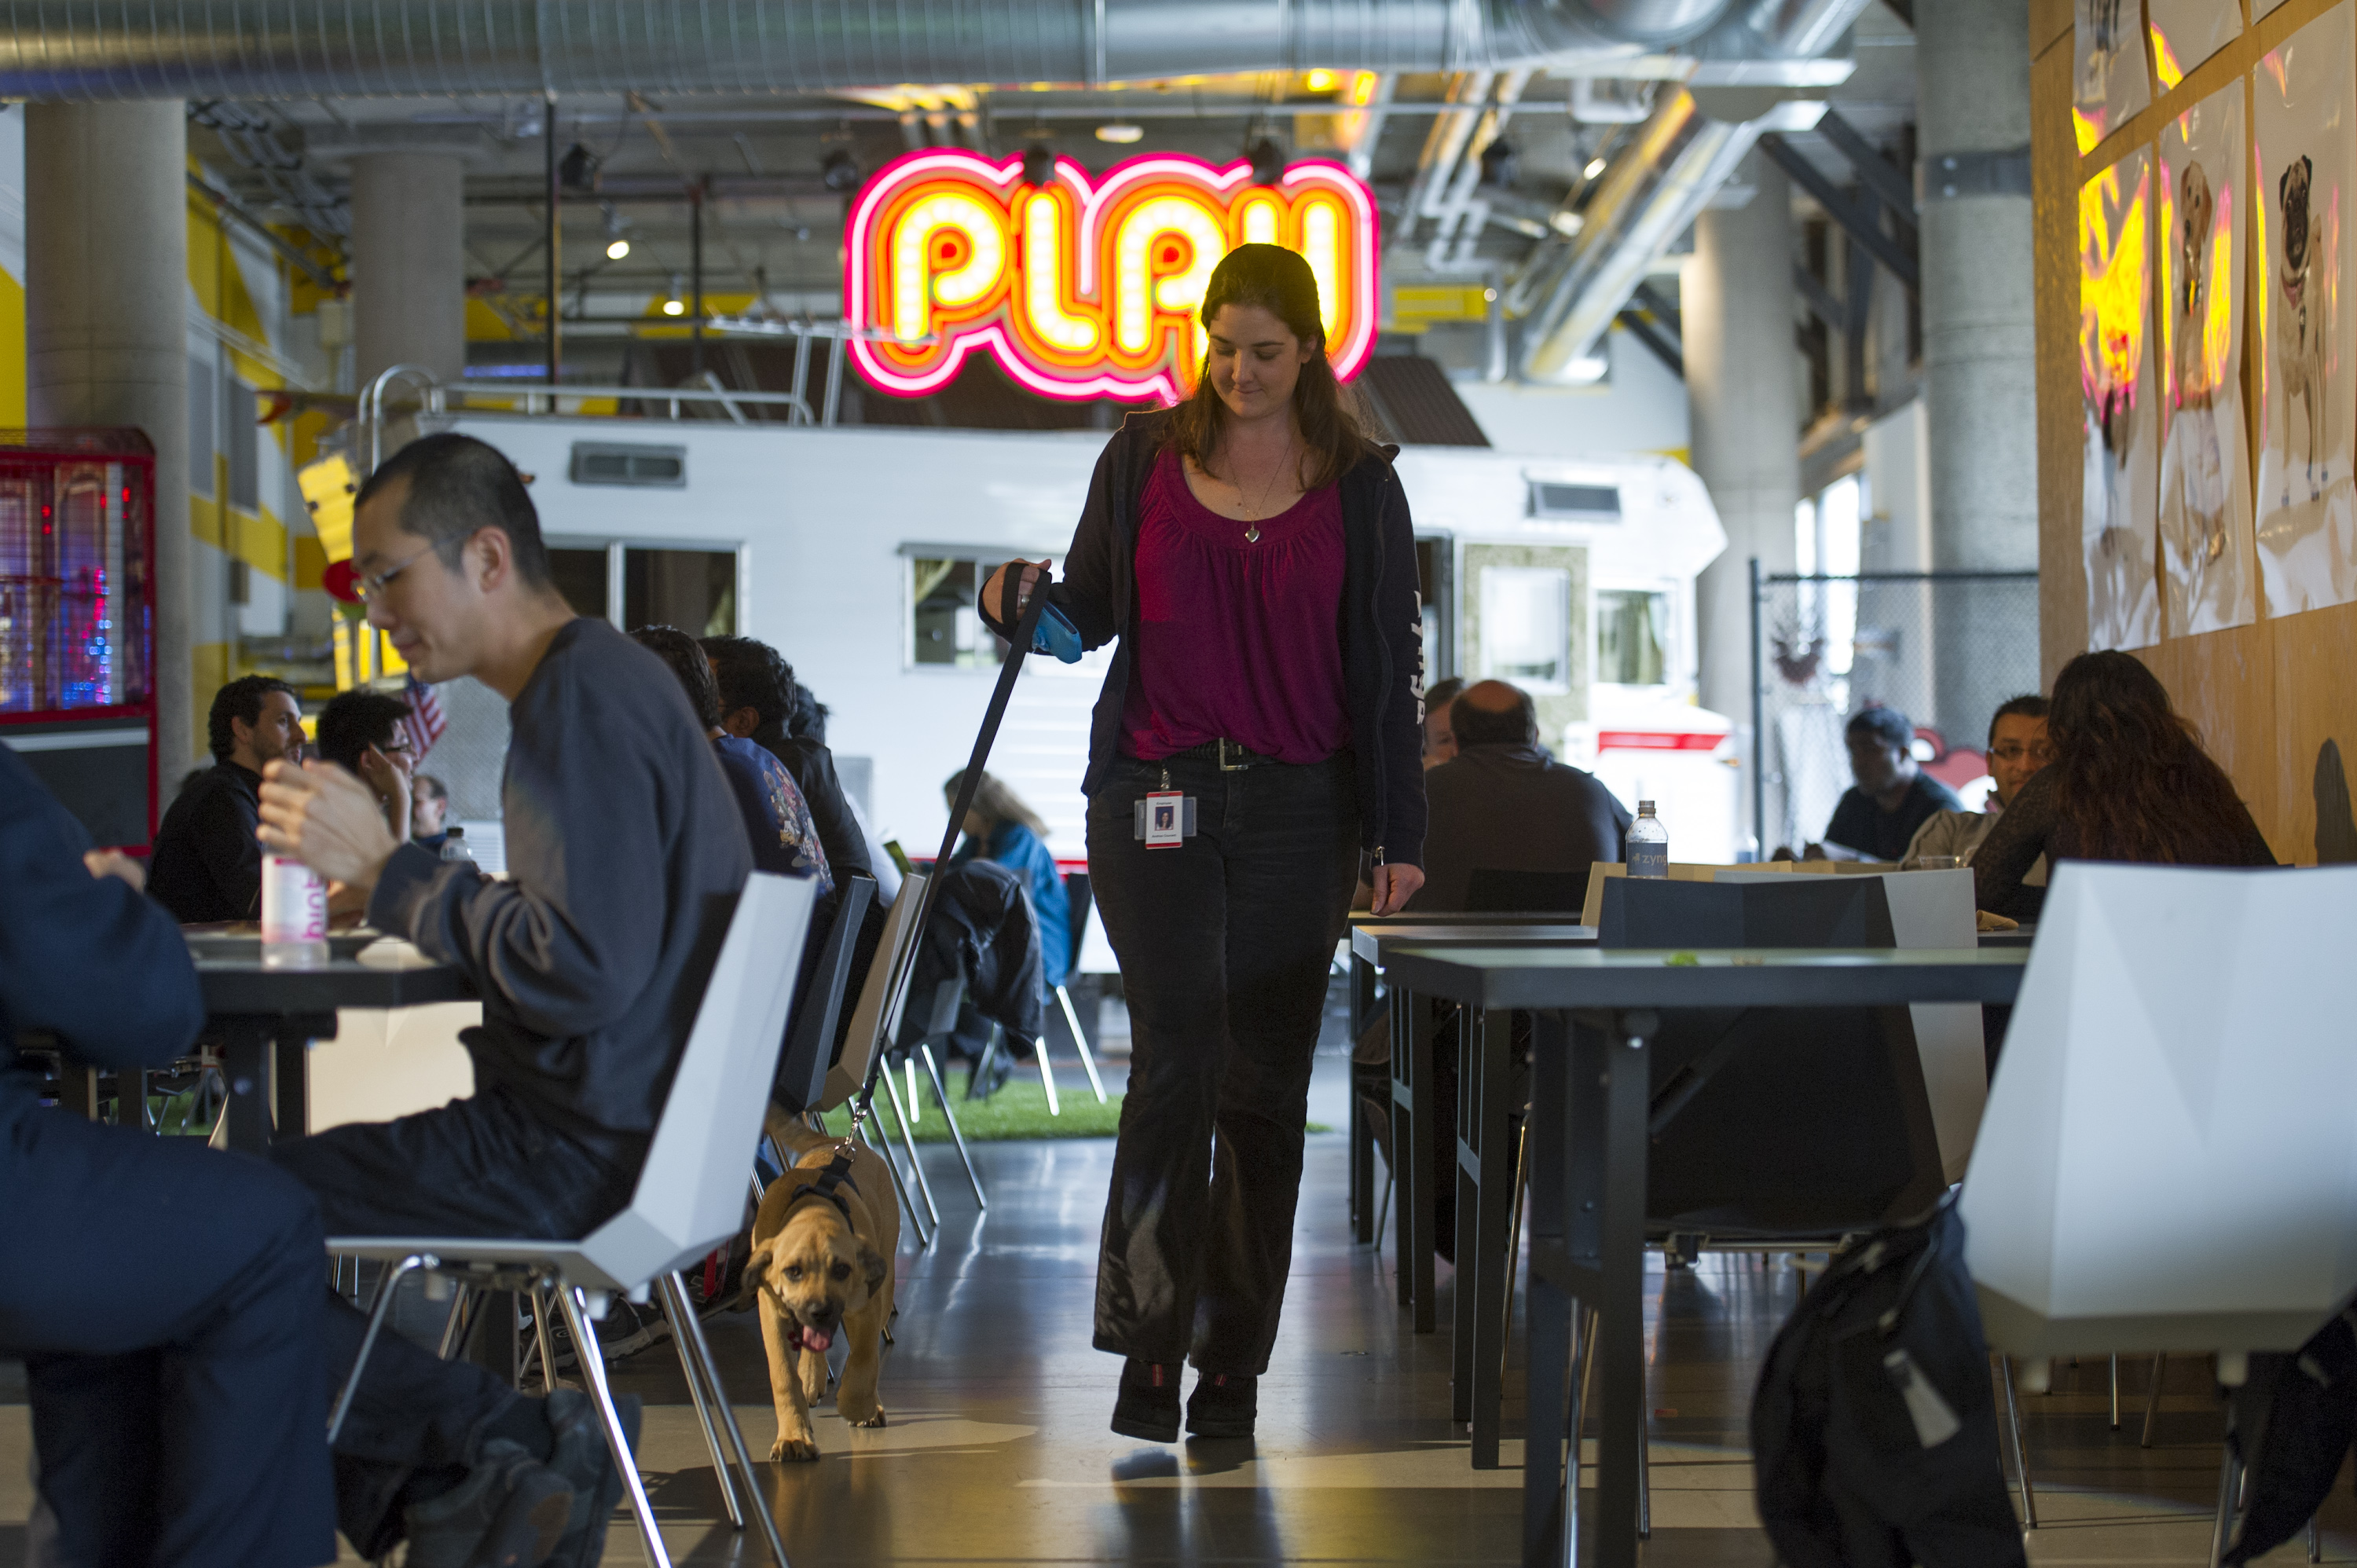 Zynga Inc. employees eat lunch at the company's headquarters in San Francisco, California. (Bloomberg&mdash;Bloomberg via Getty Images)